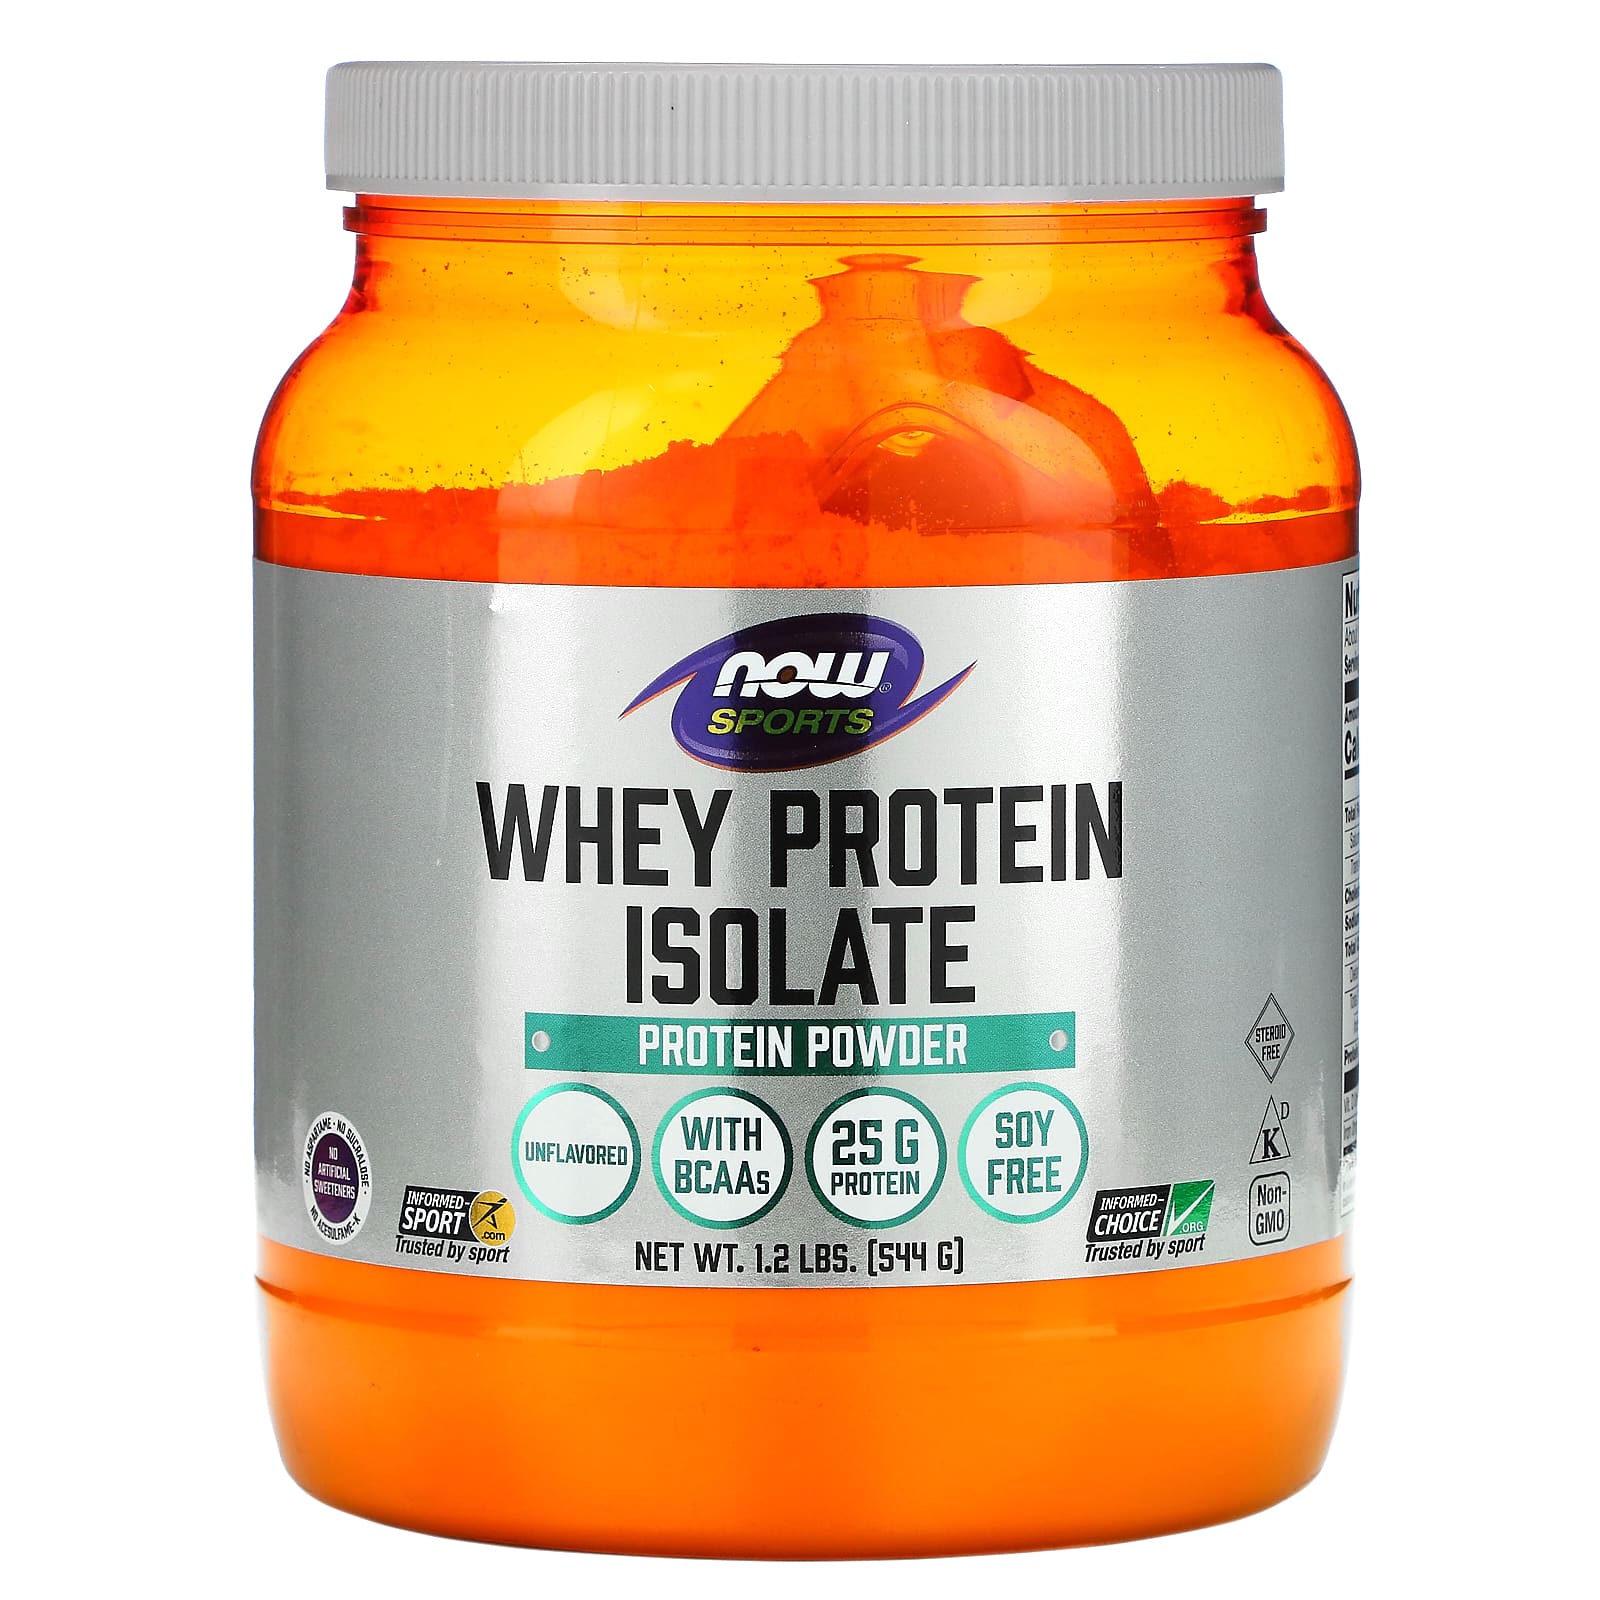 NOW SPORTS WHEY PROTEIN ISOLATE UNFLAVORED 544g